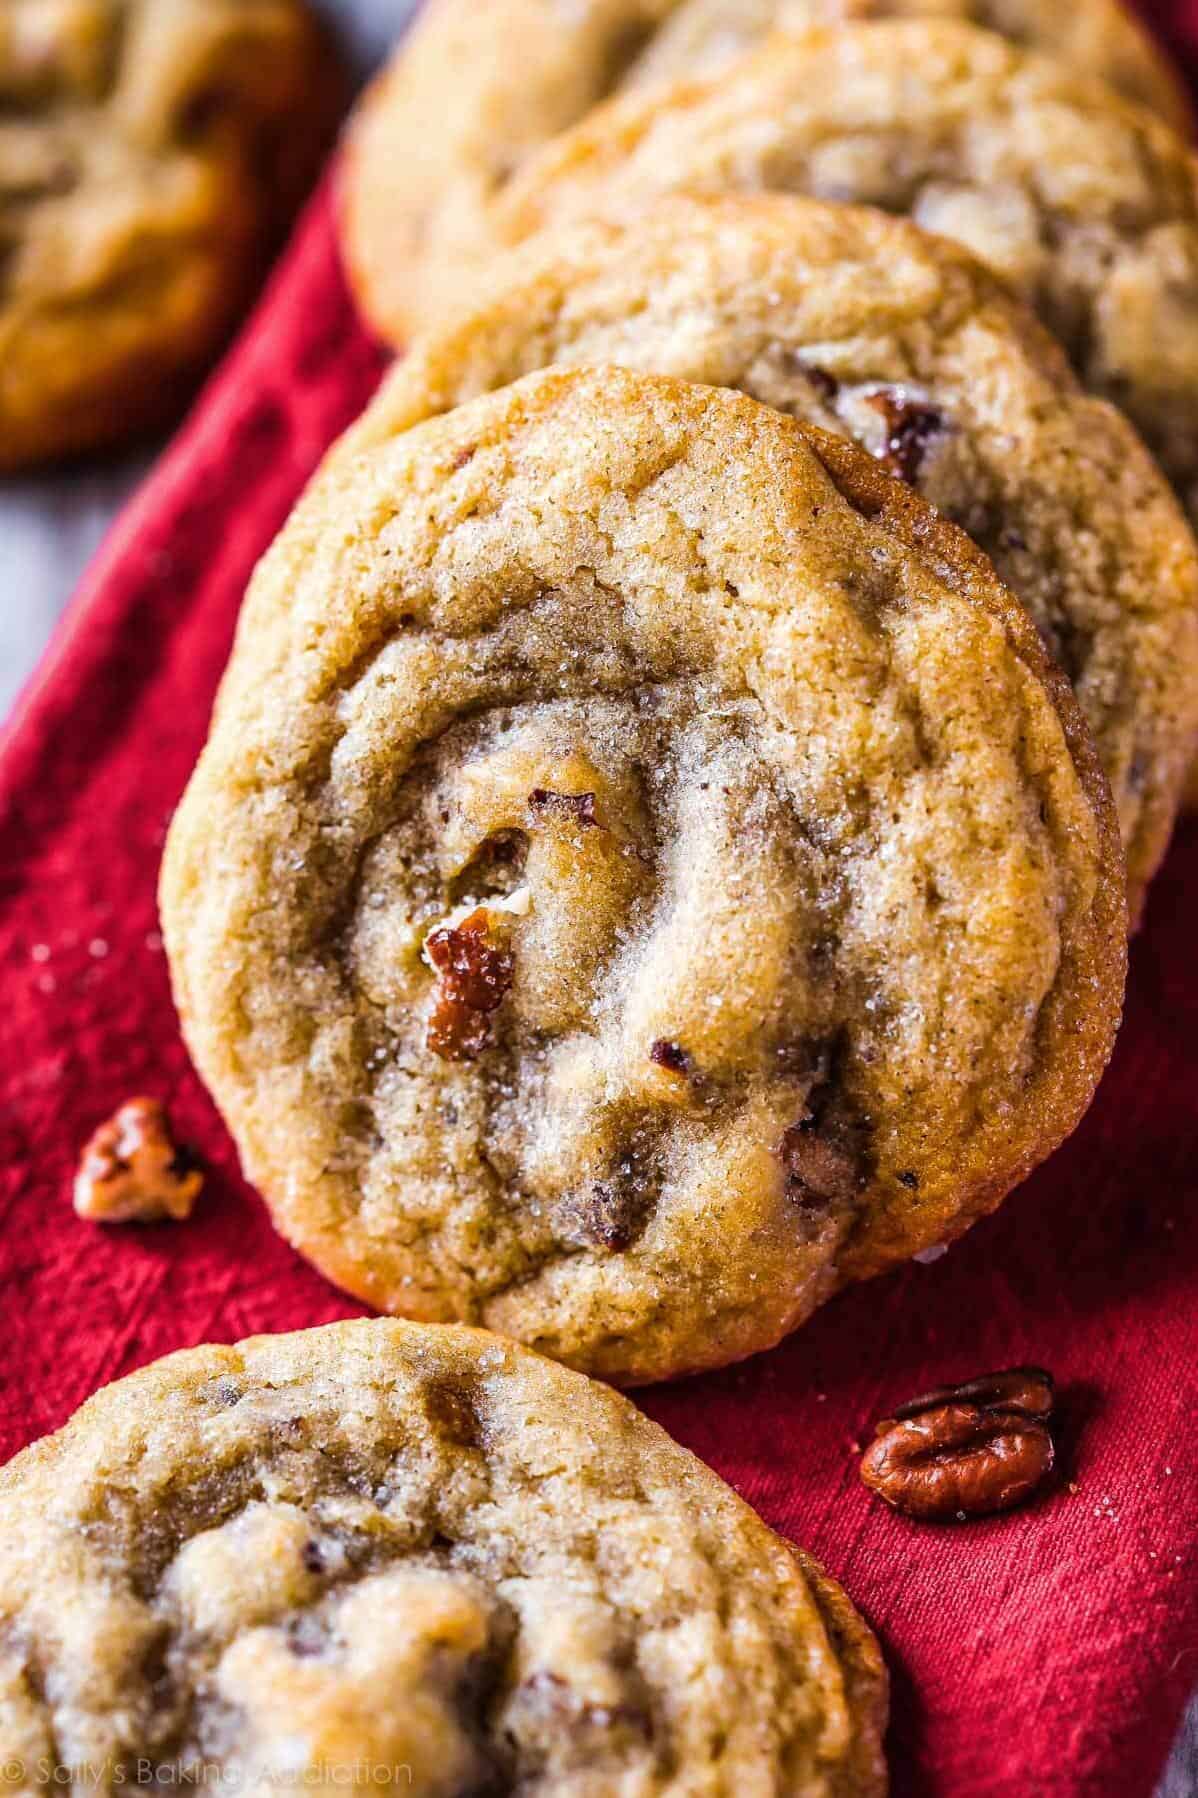  The crunch of the pecans complements the soft and buttery texture of these cookies.